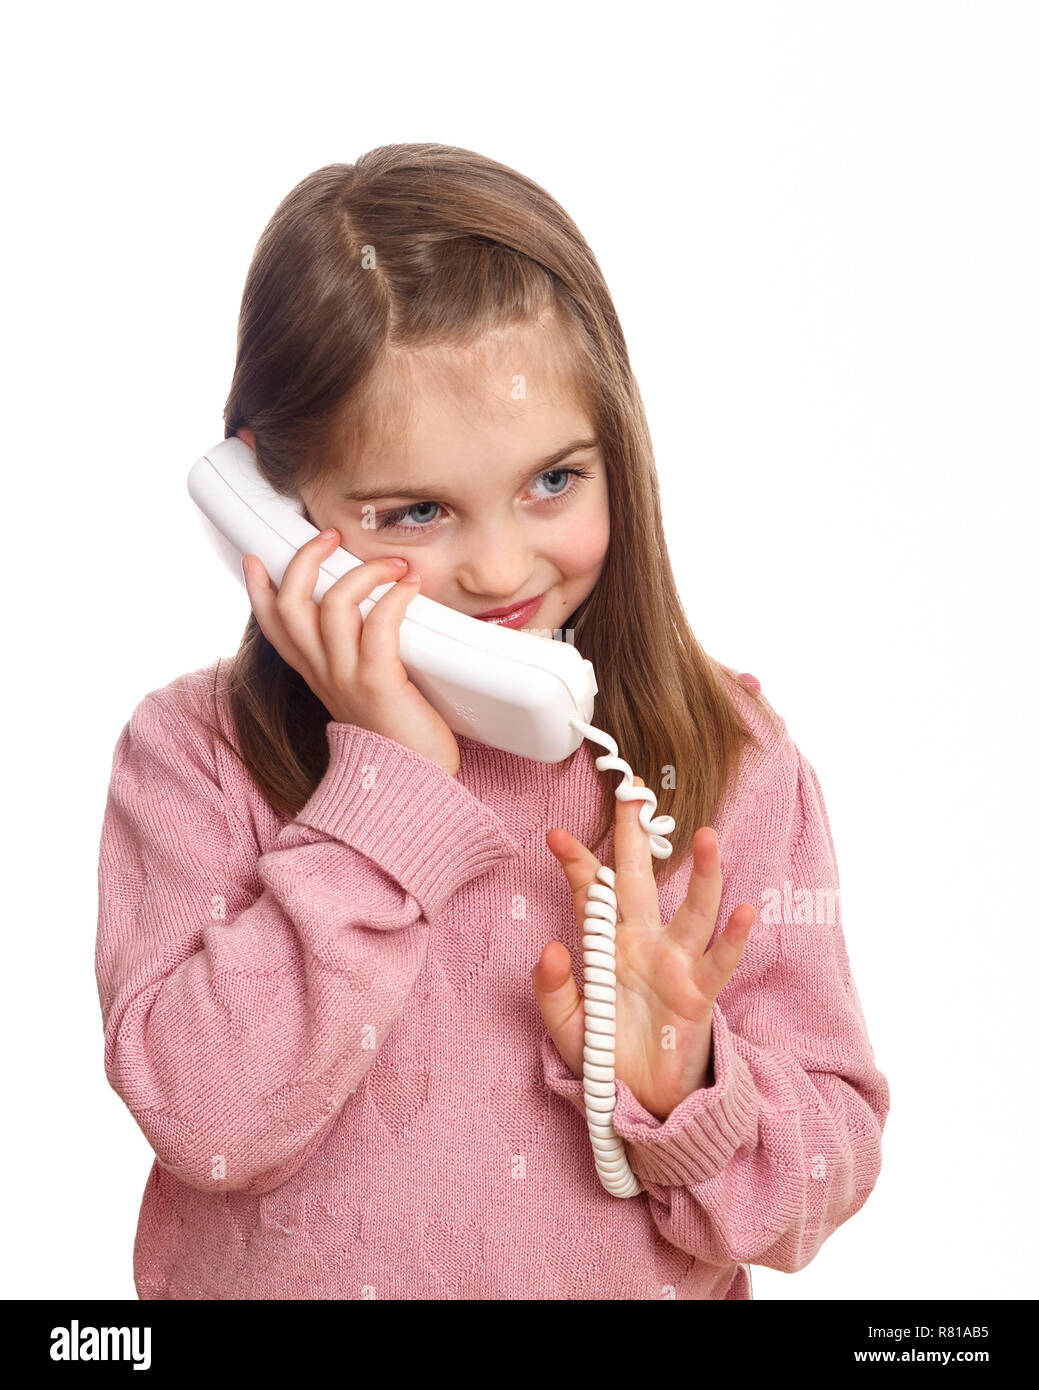 Happy cute caucasian young girl on the phone smiling isolated on white background Stock Photo